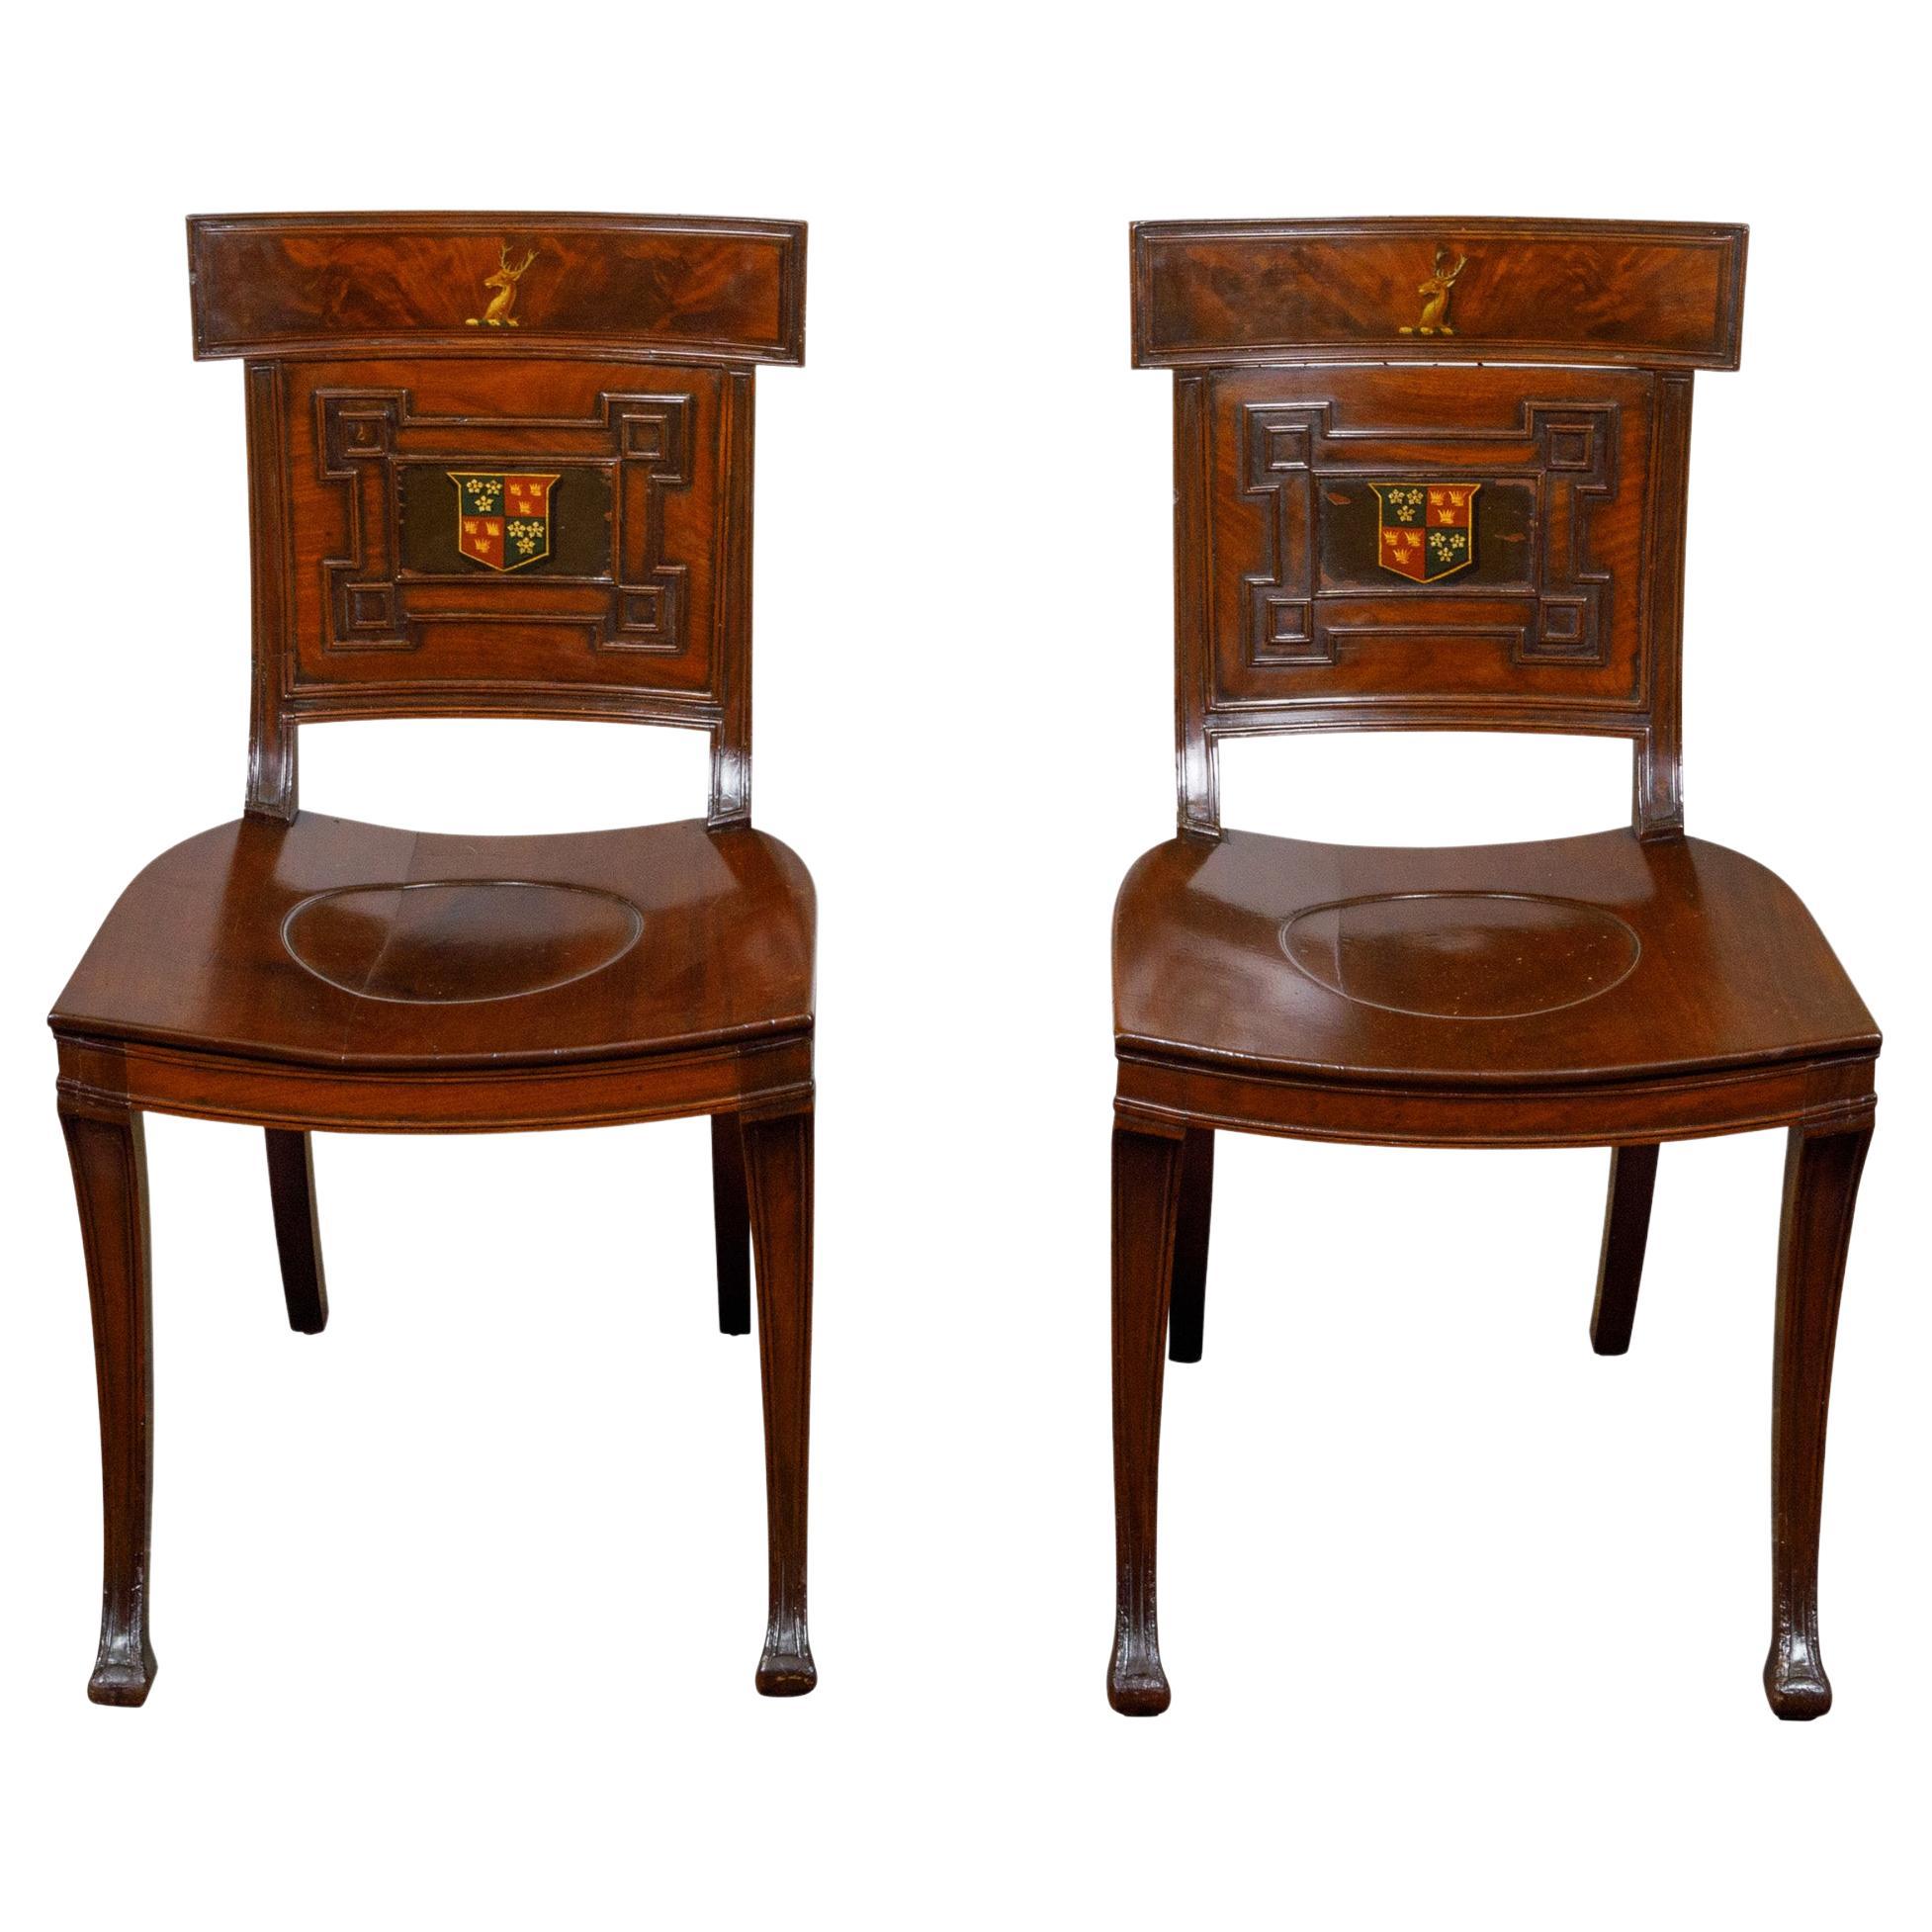 Pair of English Regency Mahogany Hall Chairs with Painted Coat of Arms